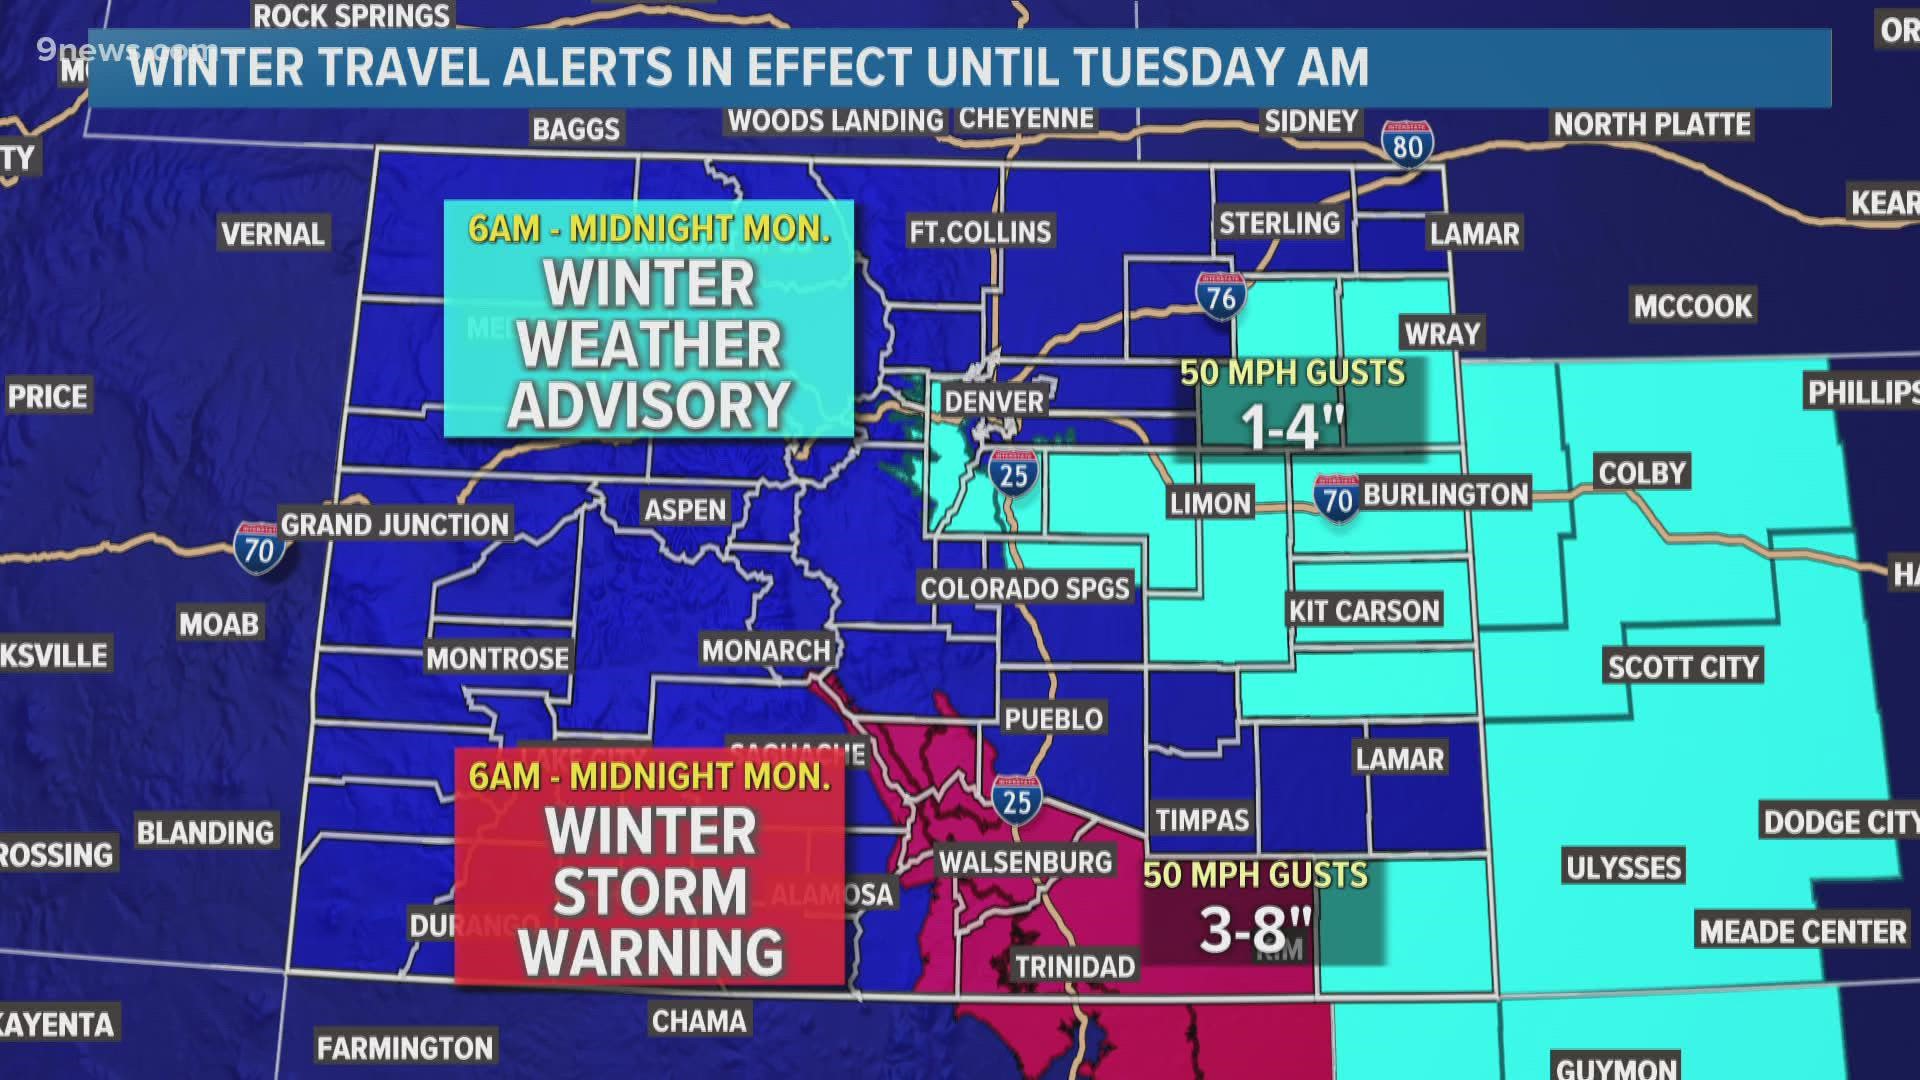 Denver will likely only see a slushy inch or two of low-impact snowfall.